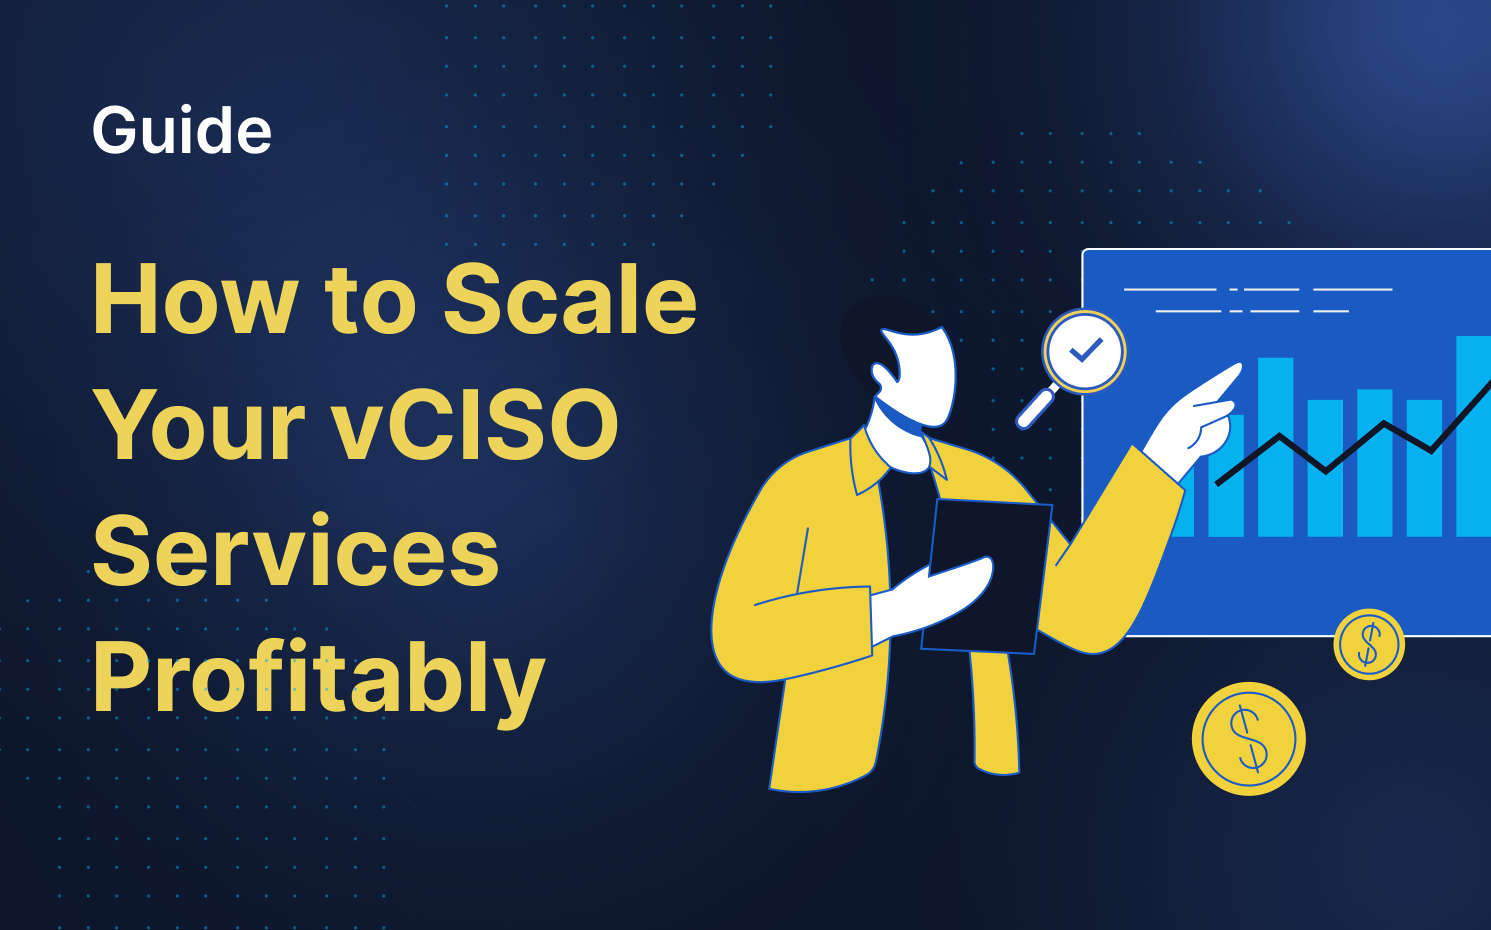 How to scale your vCISO services profitably